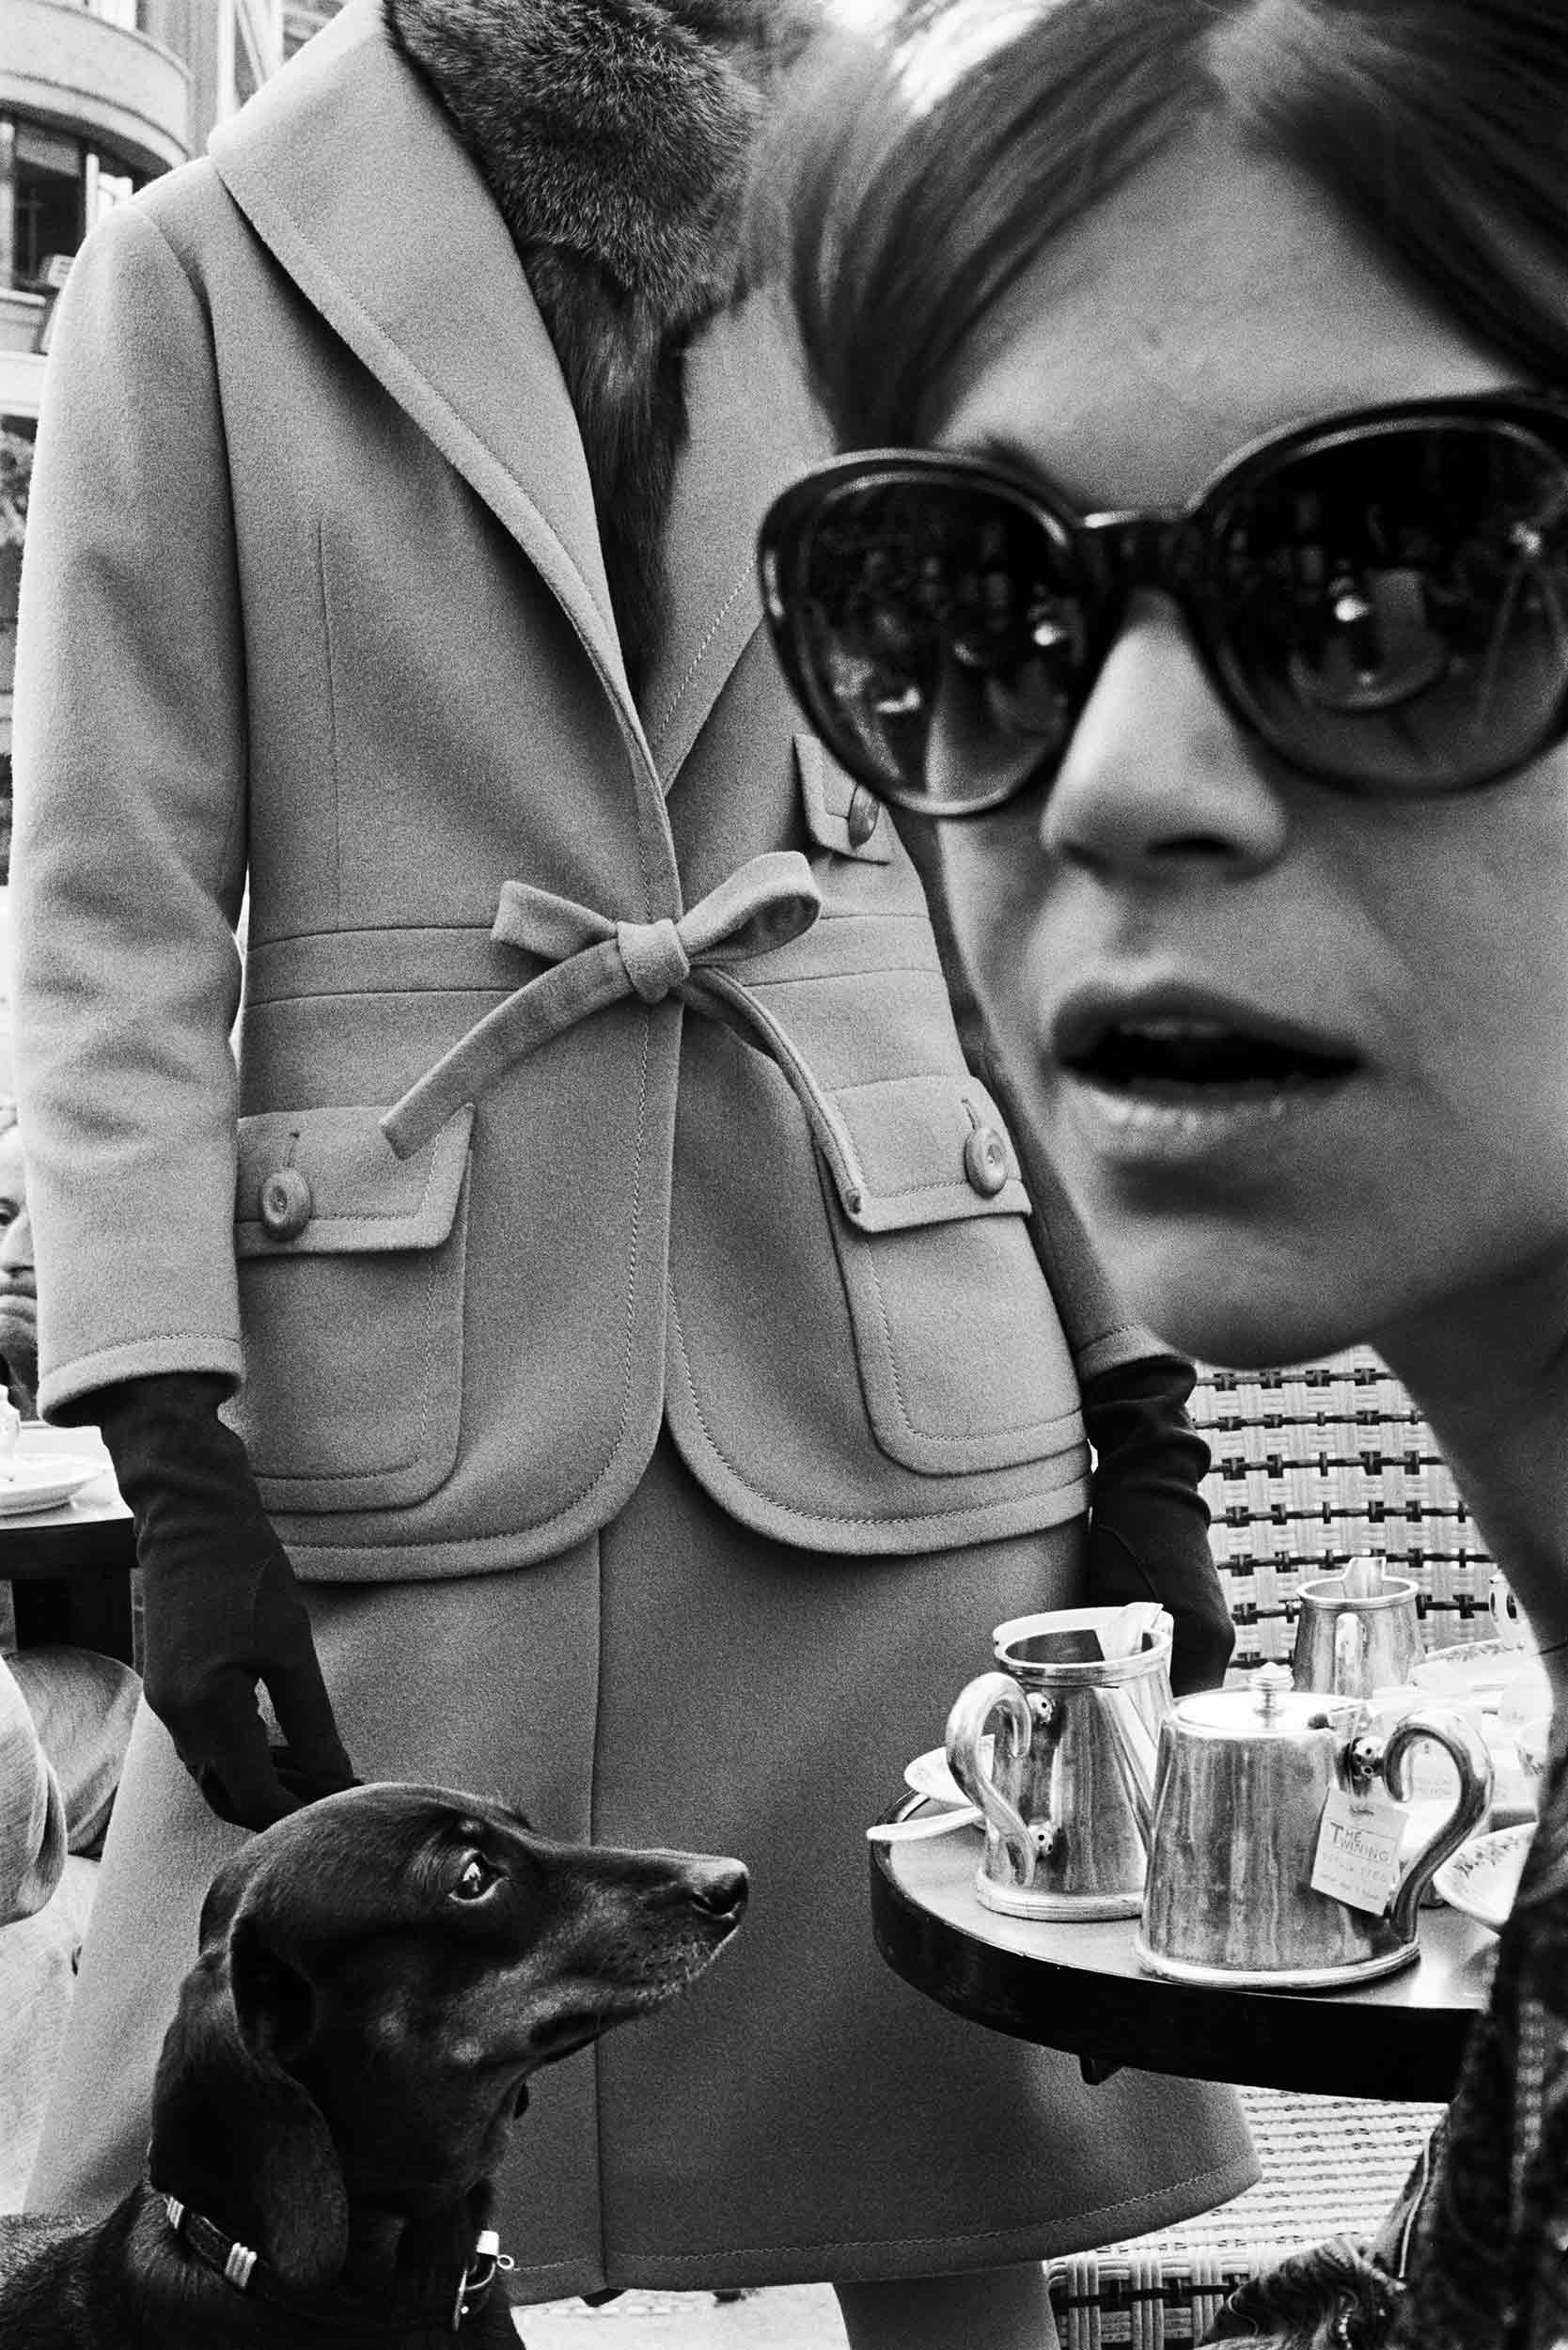 Frank Horvat: Paris, the World and Fashion